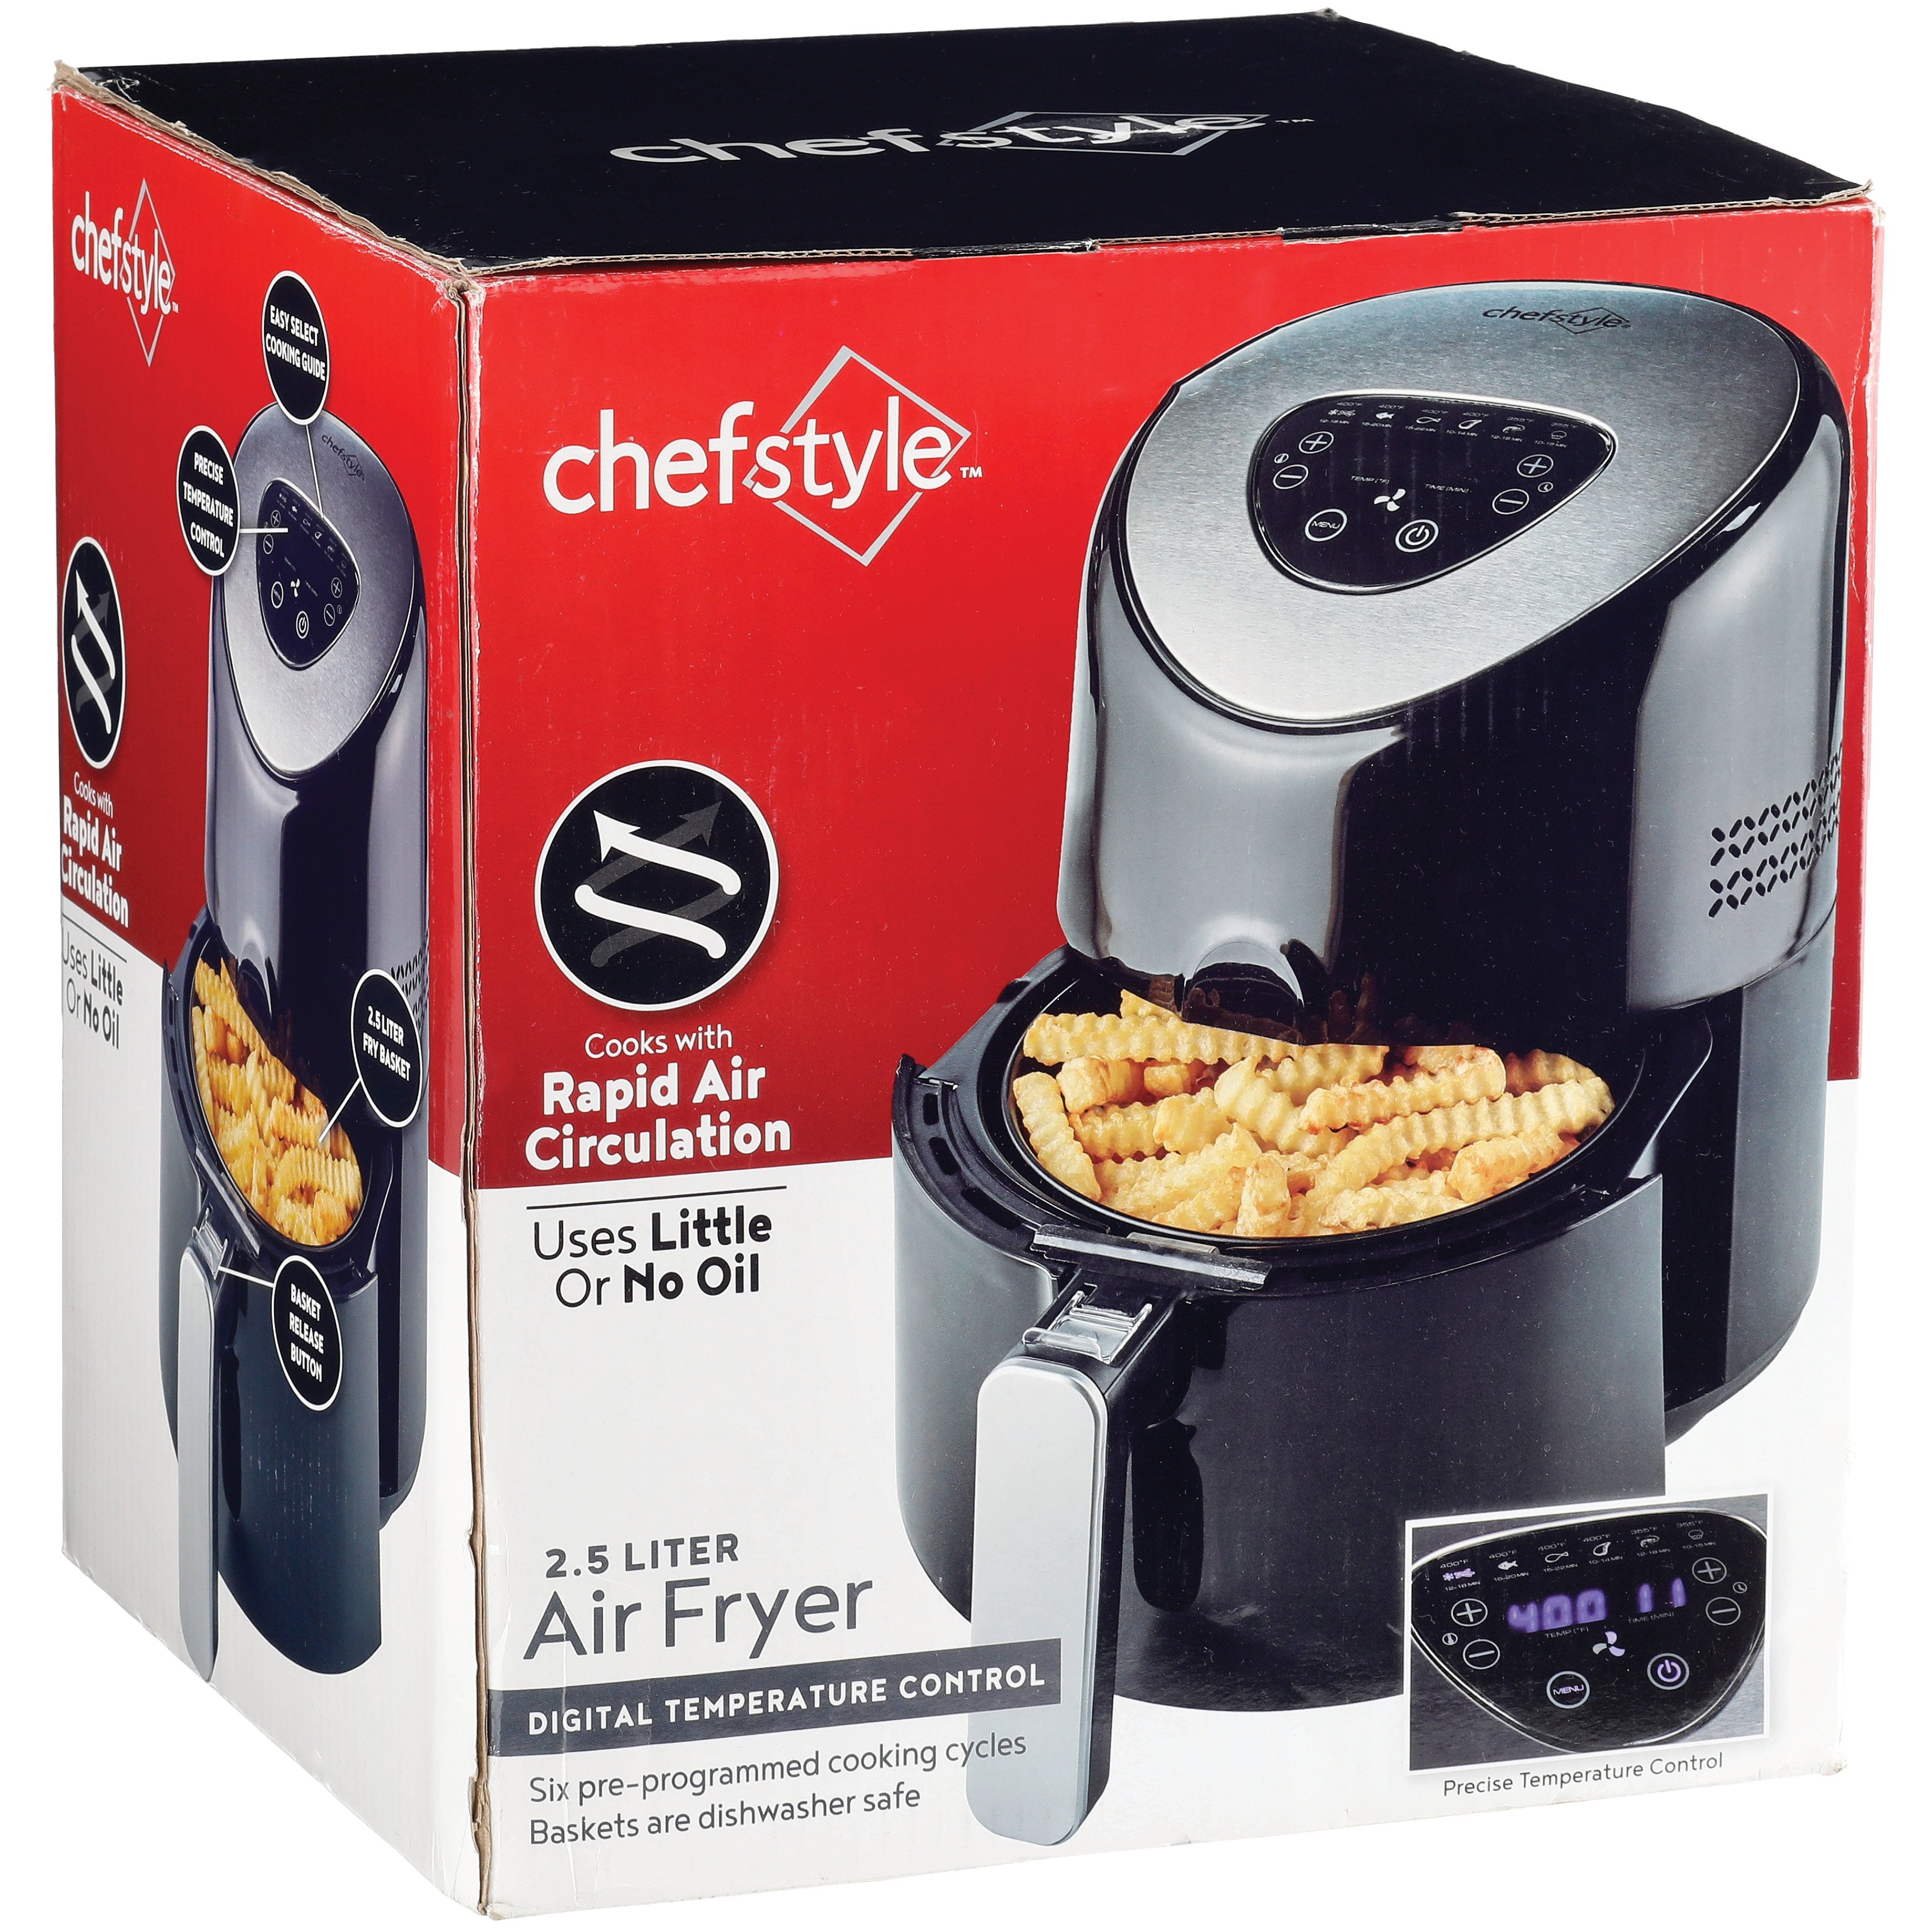 FG Round Air Fryer Liners, 50 Ct - Shop Baking Tools at H-E-B